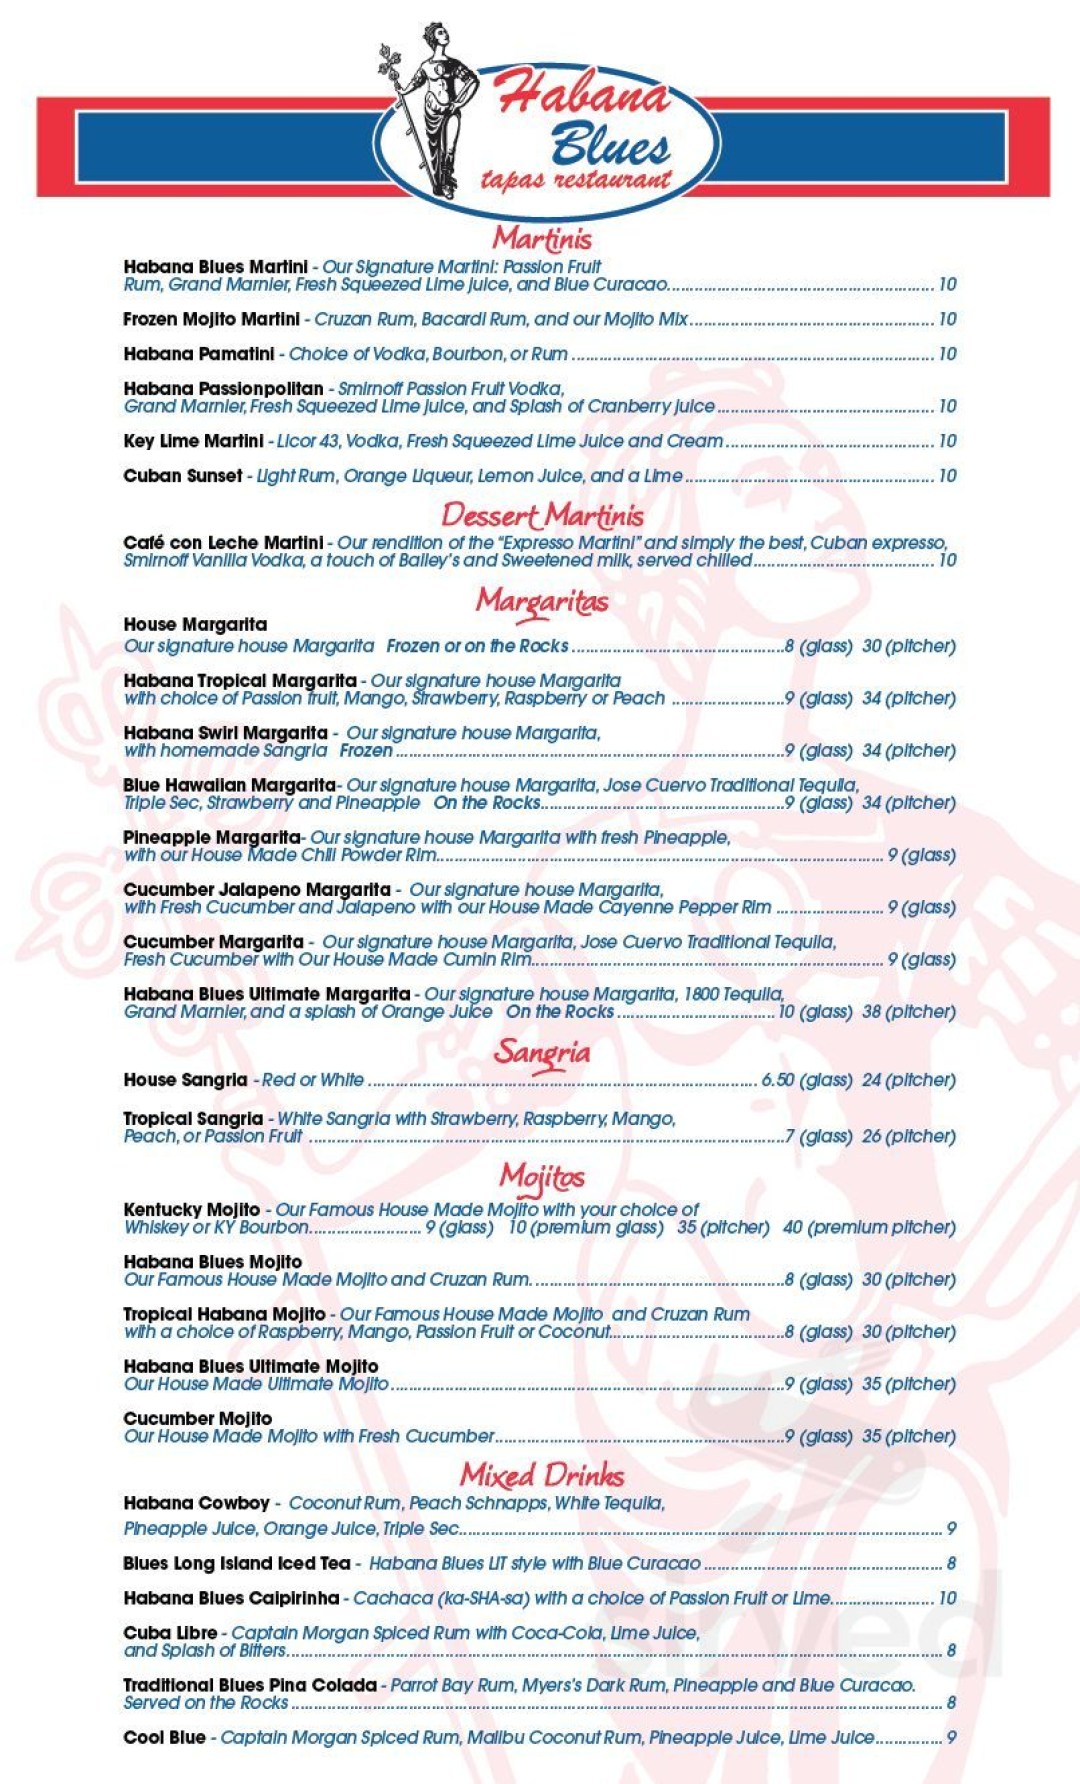 Picture of: Habana Blues Restaurant and Lounge menu in Louisville, Kentucky, USA